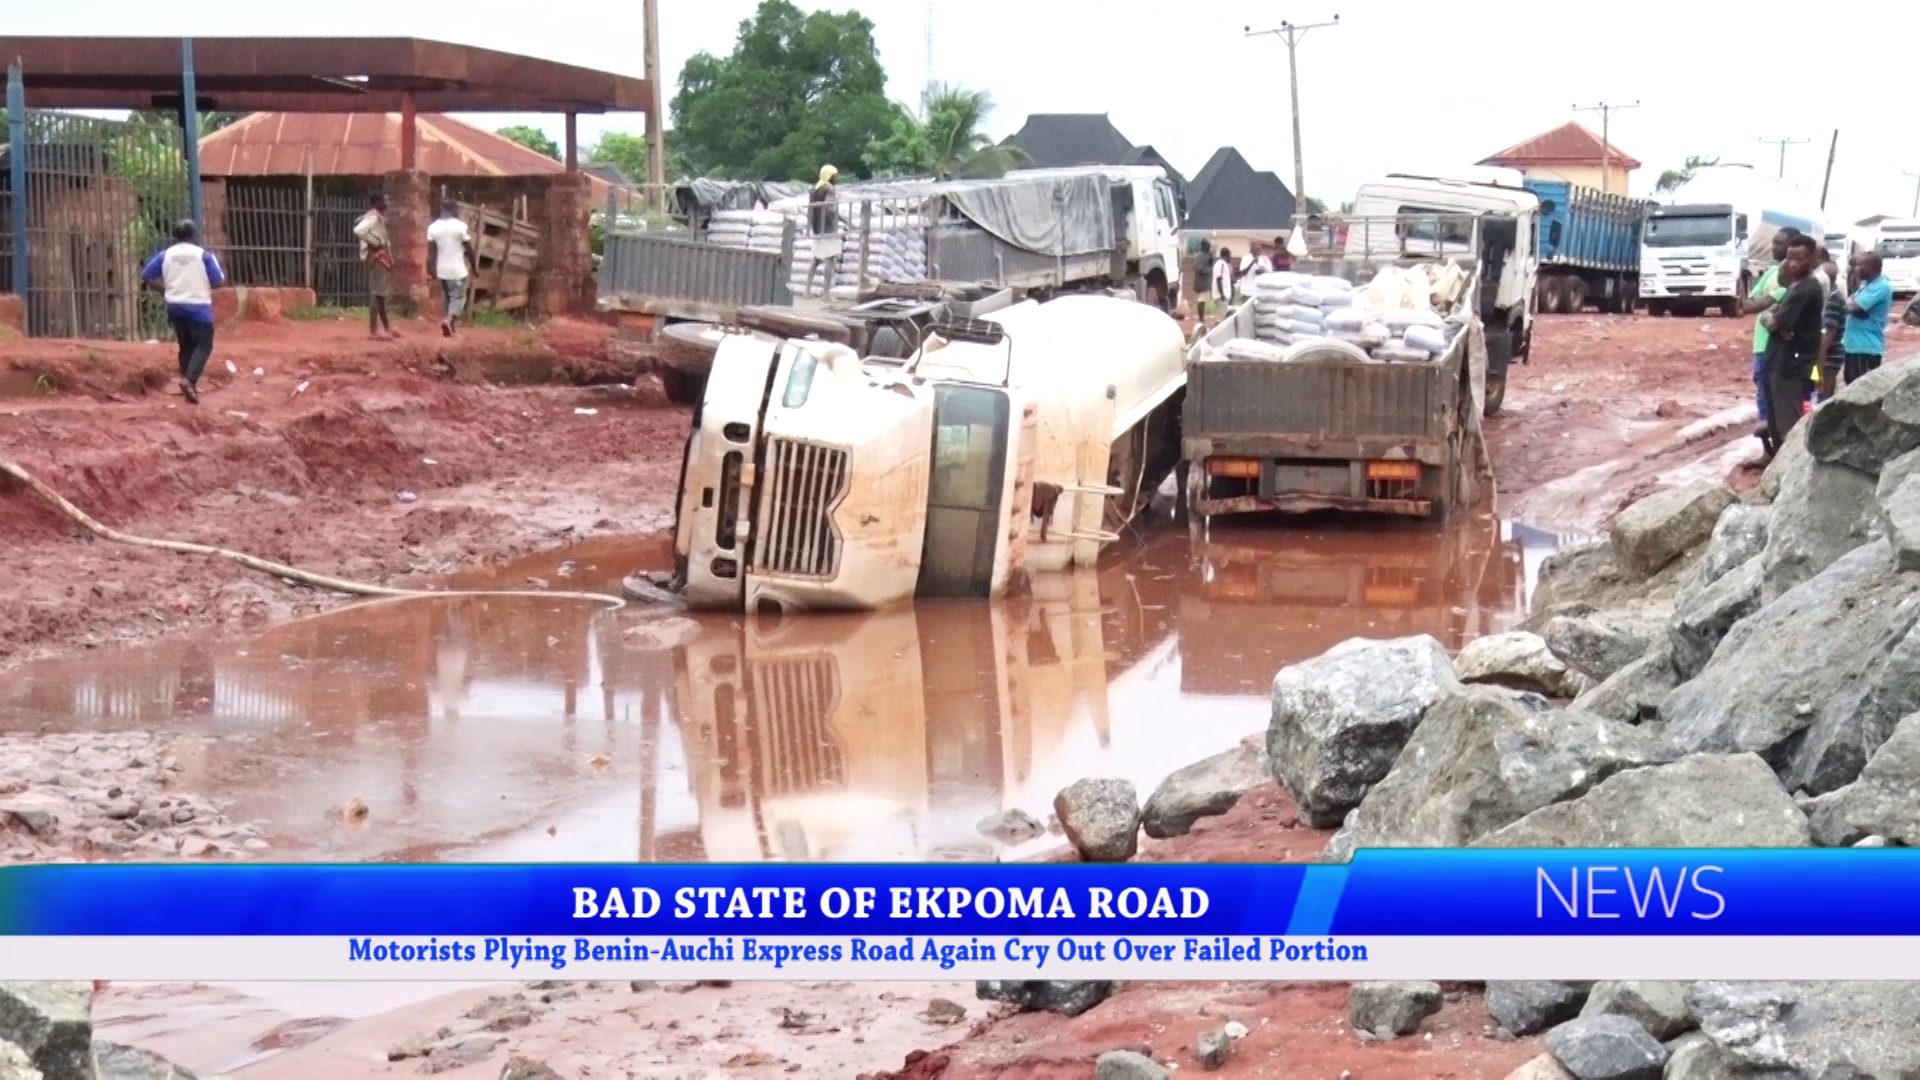 Motorists Plying Benin-Auchi Express Road Again Cry Out Over Failed Portion